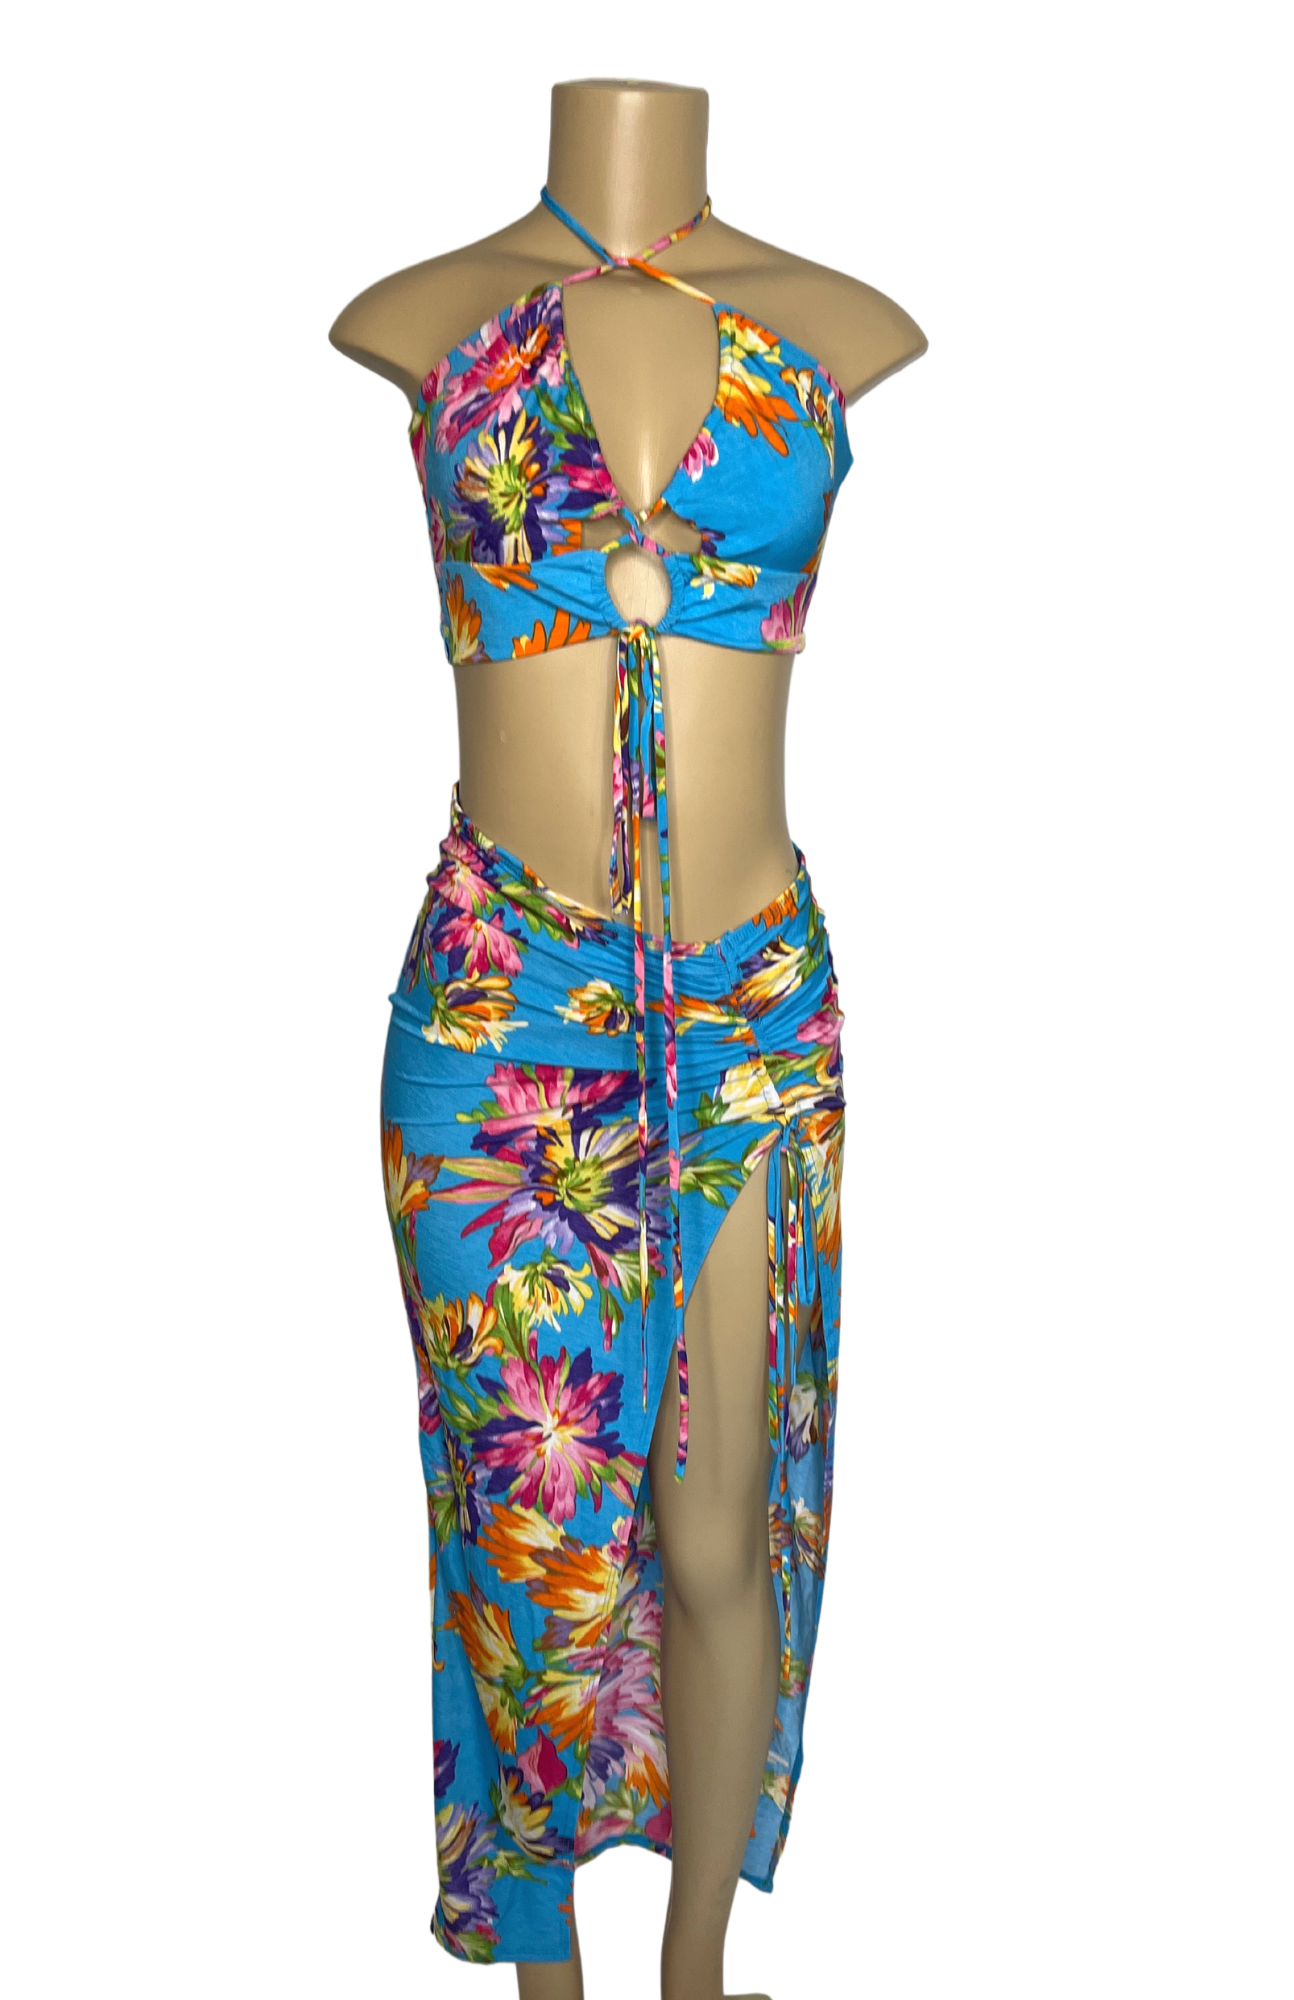 blue set,blue matching set,skirt set,sets,tropical clothes,beach oufit,beachclothes,party outfit,maxi skirt,rap around top,yup she bad skirt set,